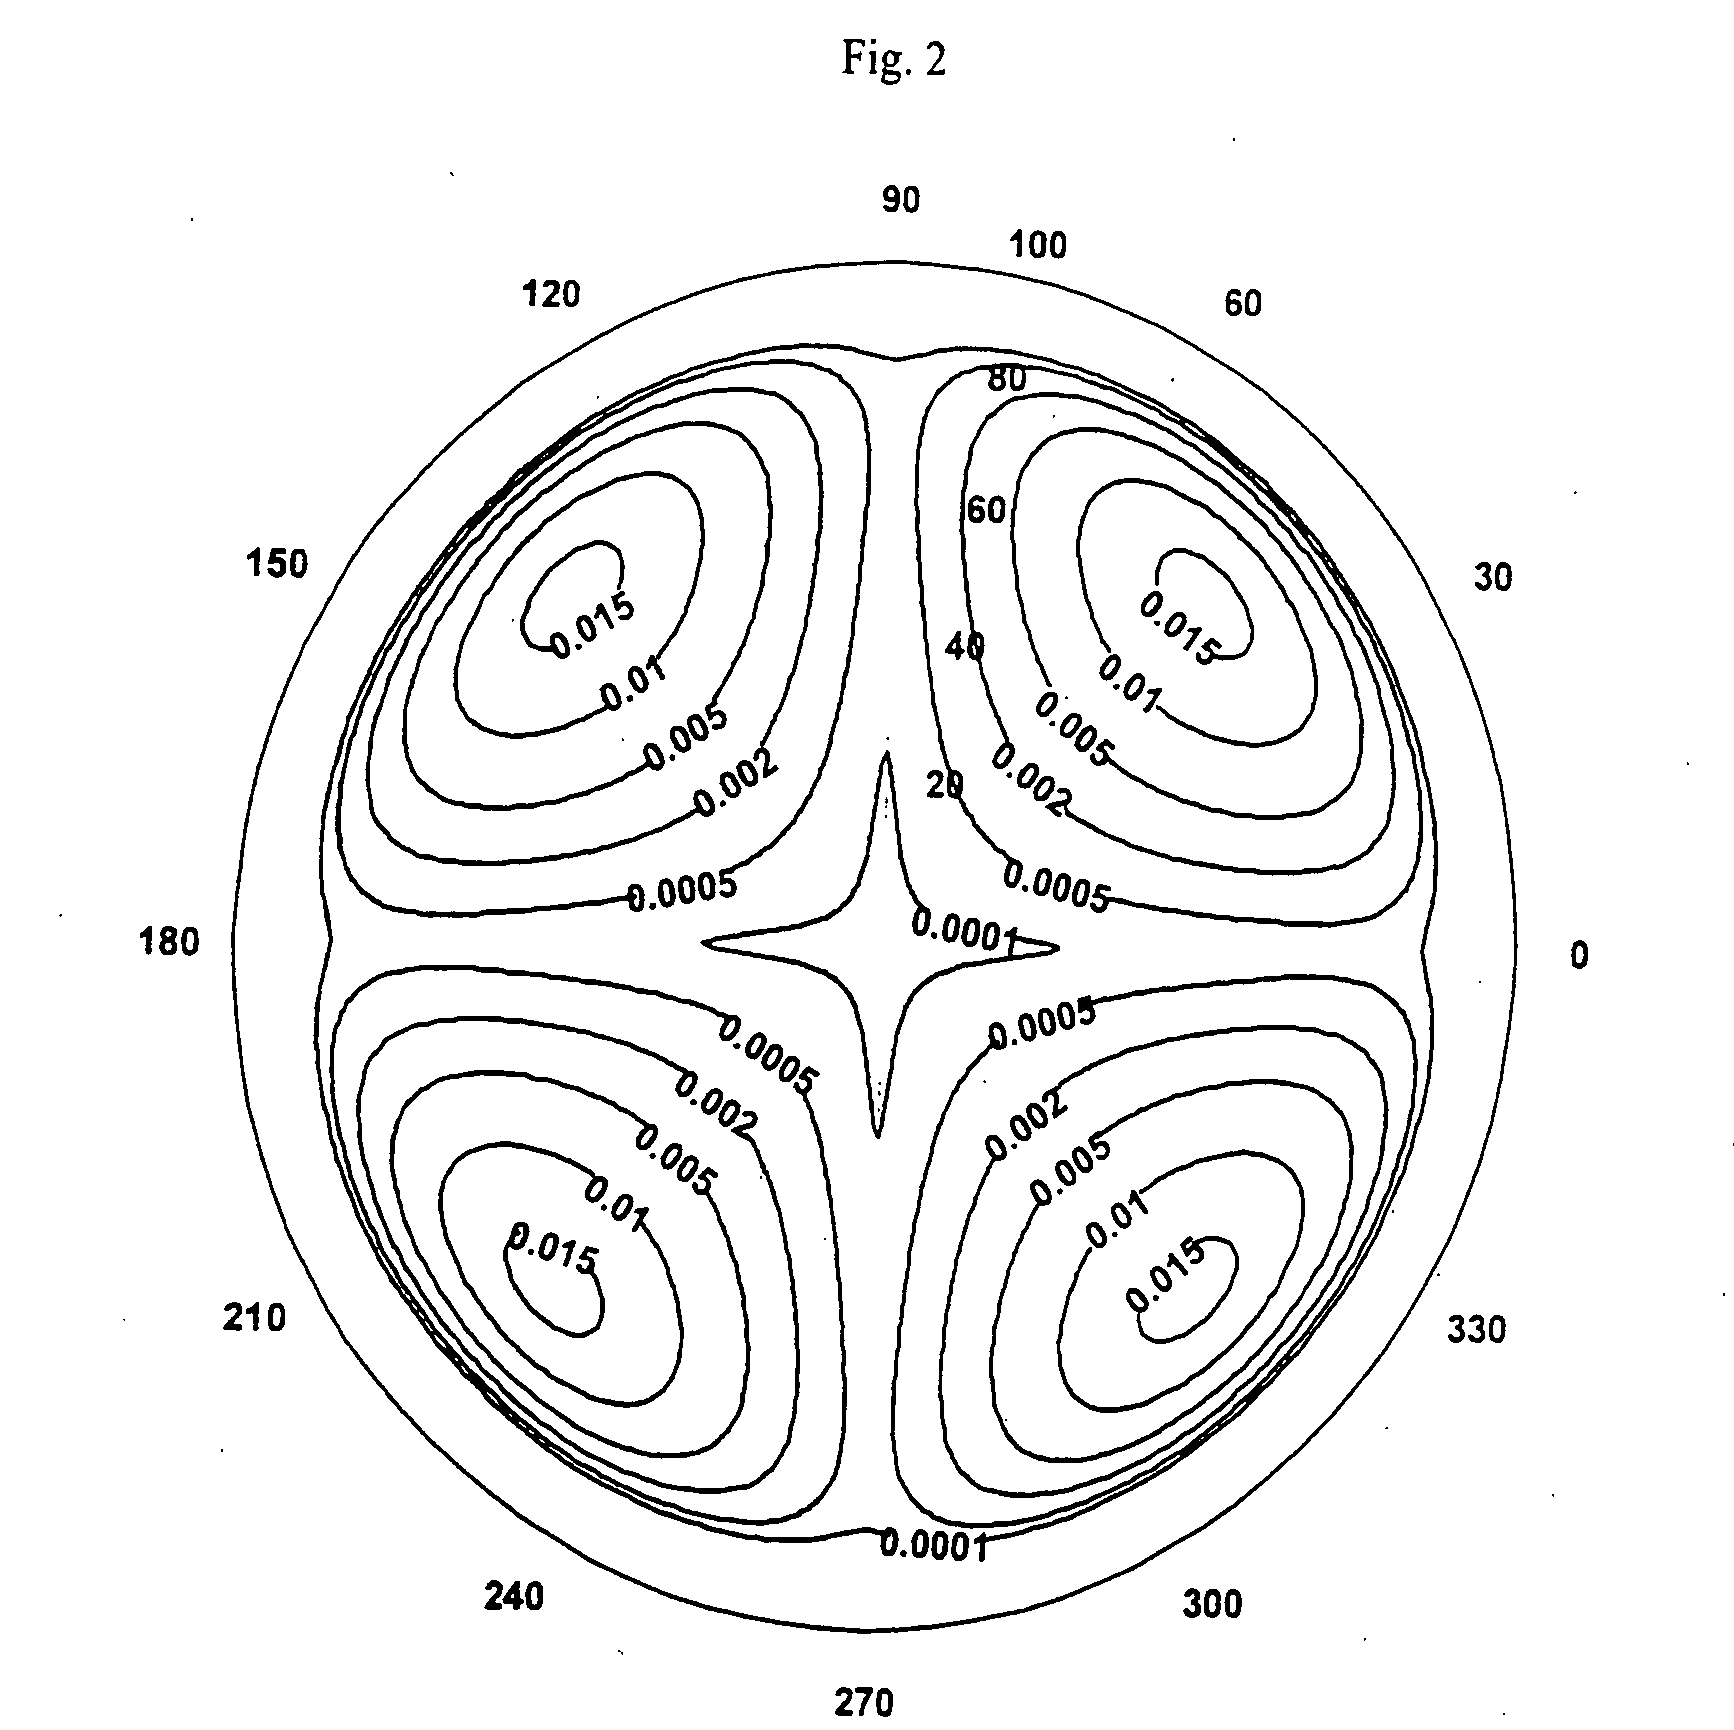 Multi-film compensated liquid crystal display with initial homogeneous alignment